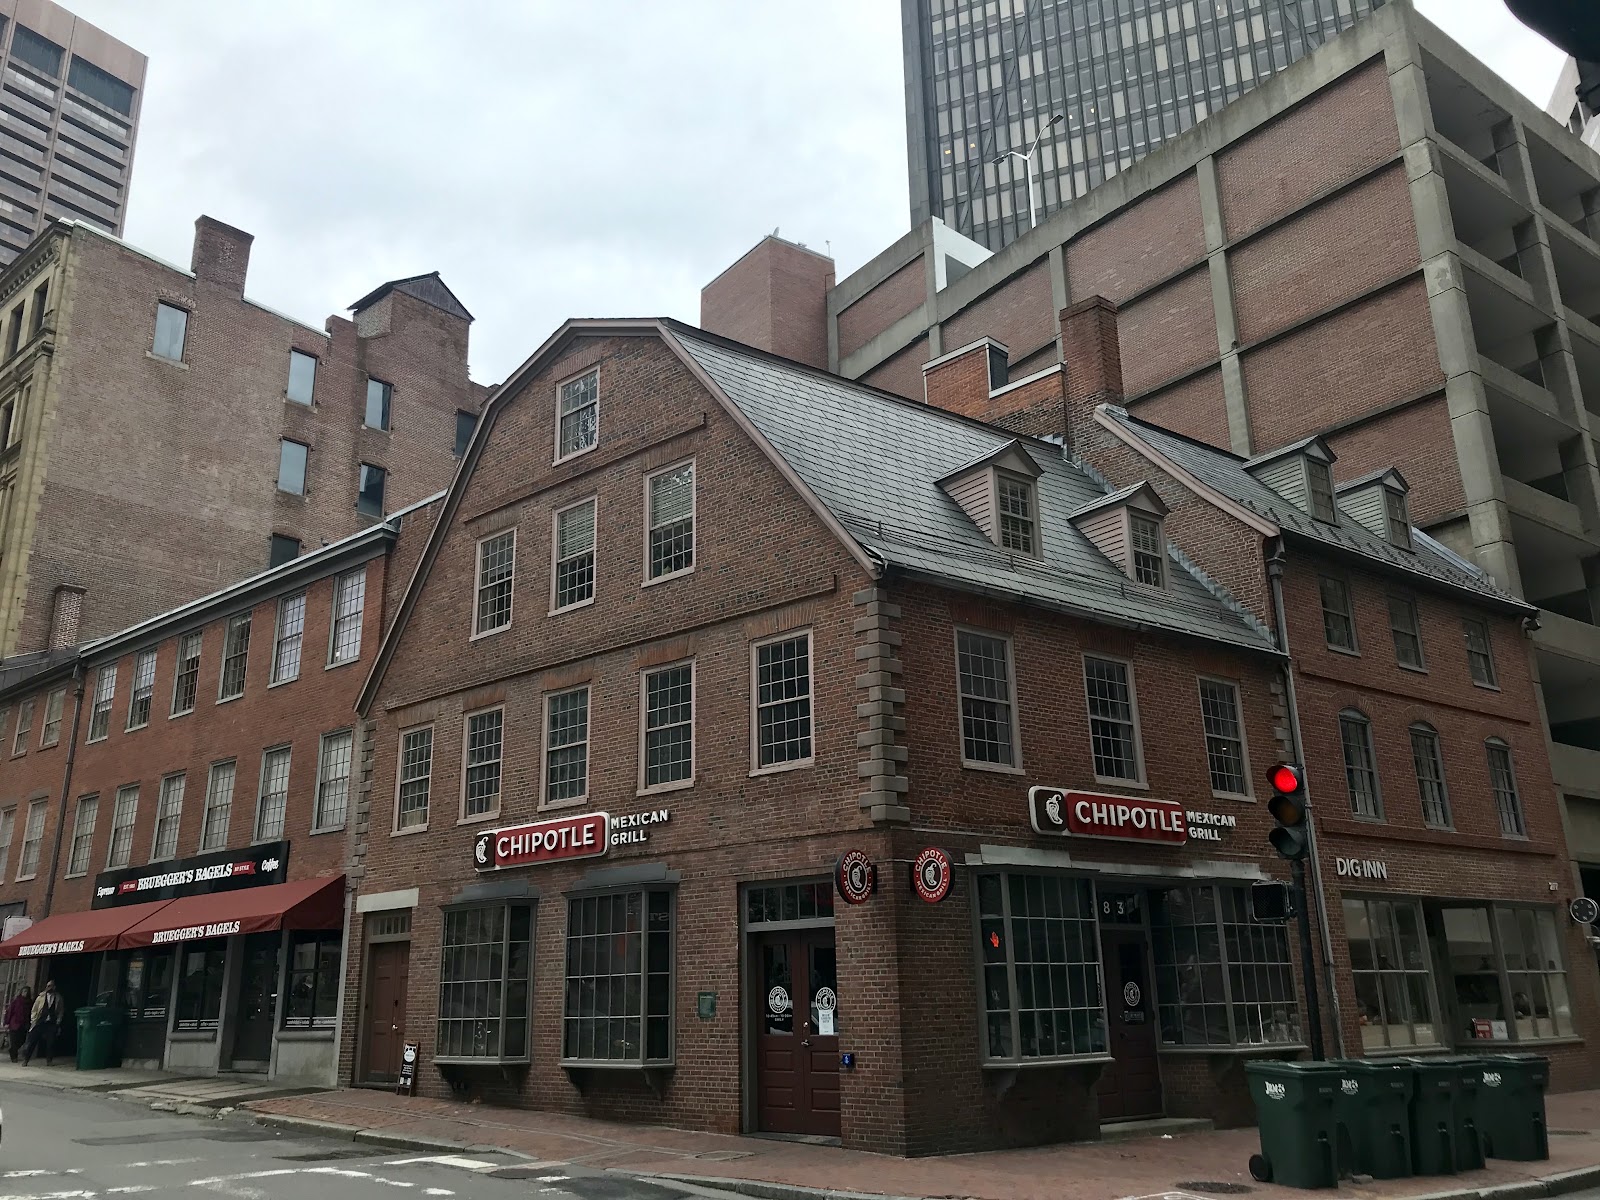 A self-guided tour of the Freedom Trail